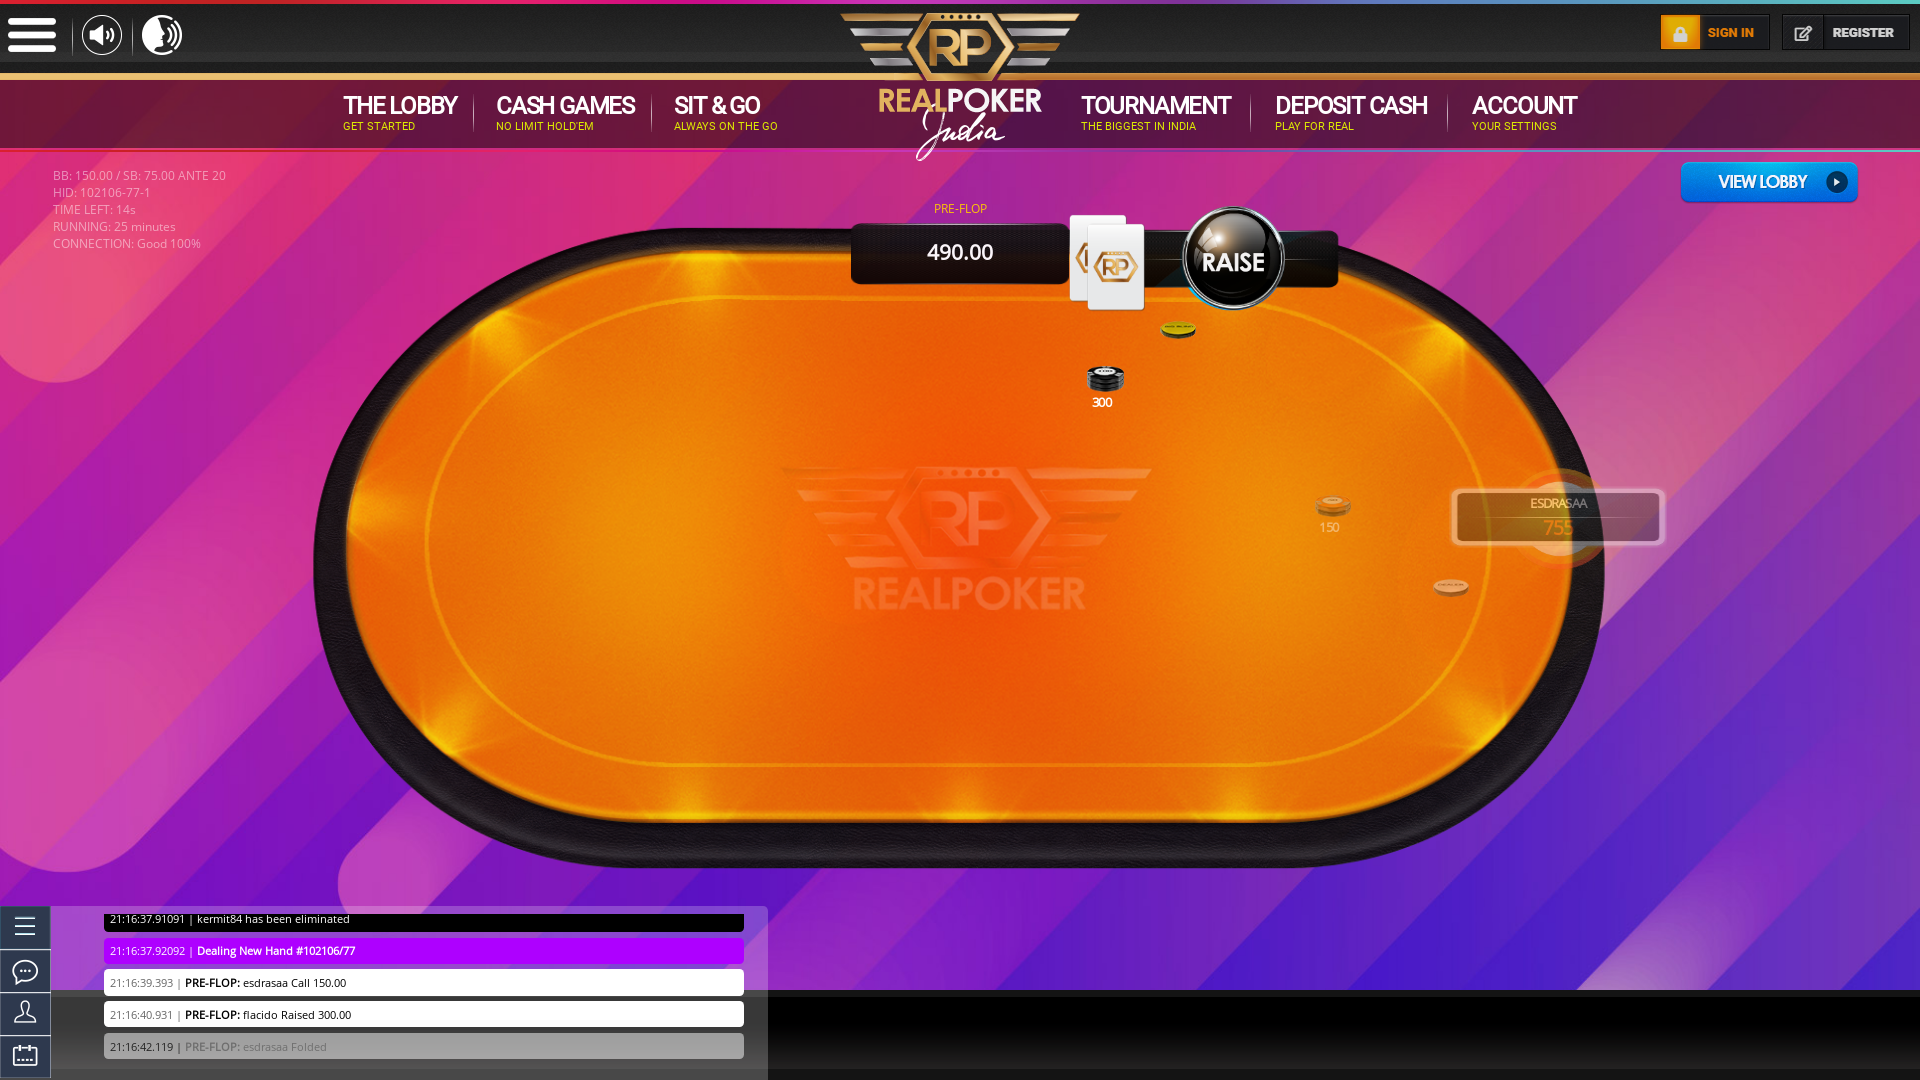 Indian online poker on a 6 player table in the 25th minute match up